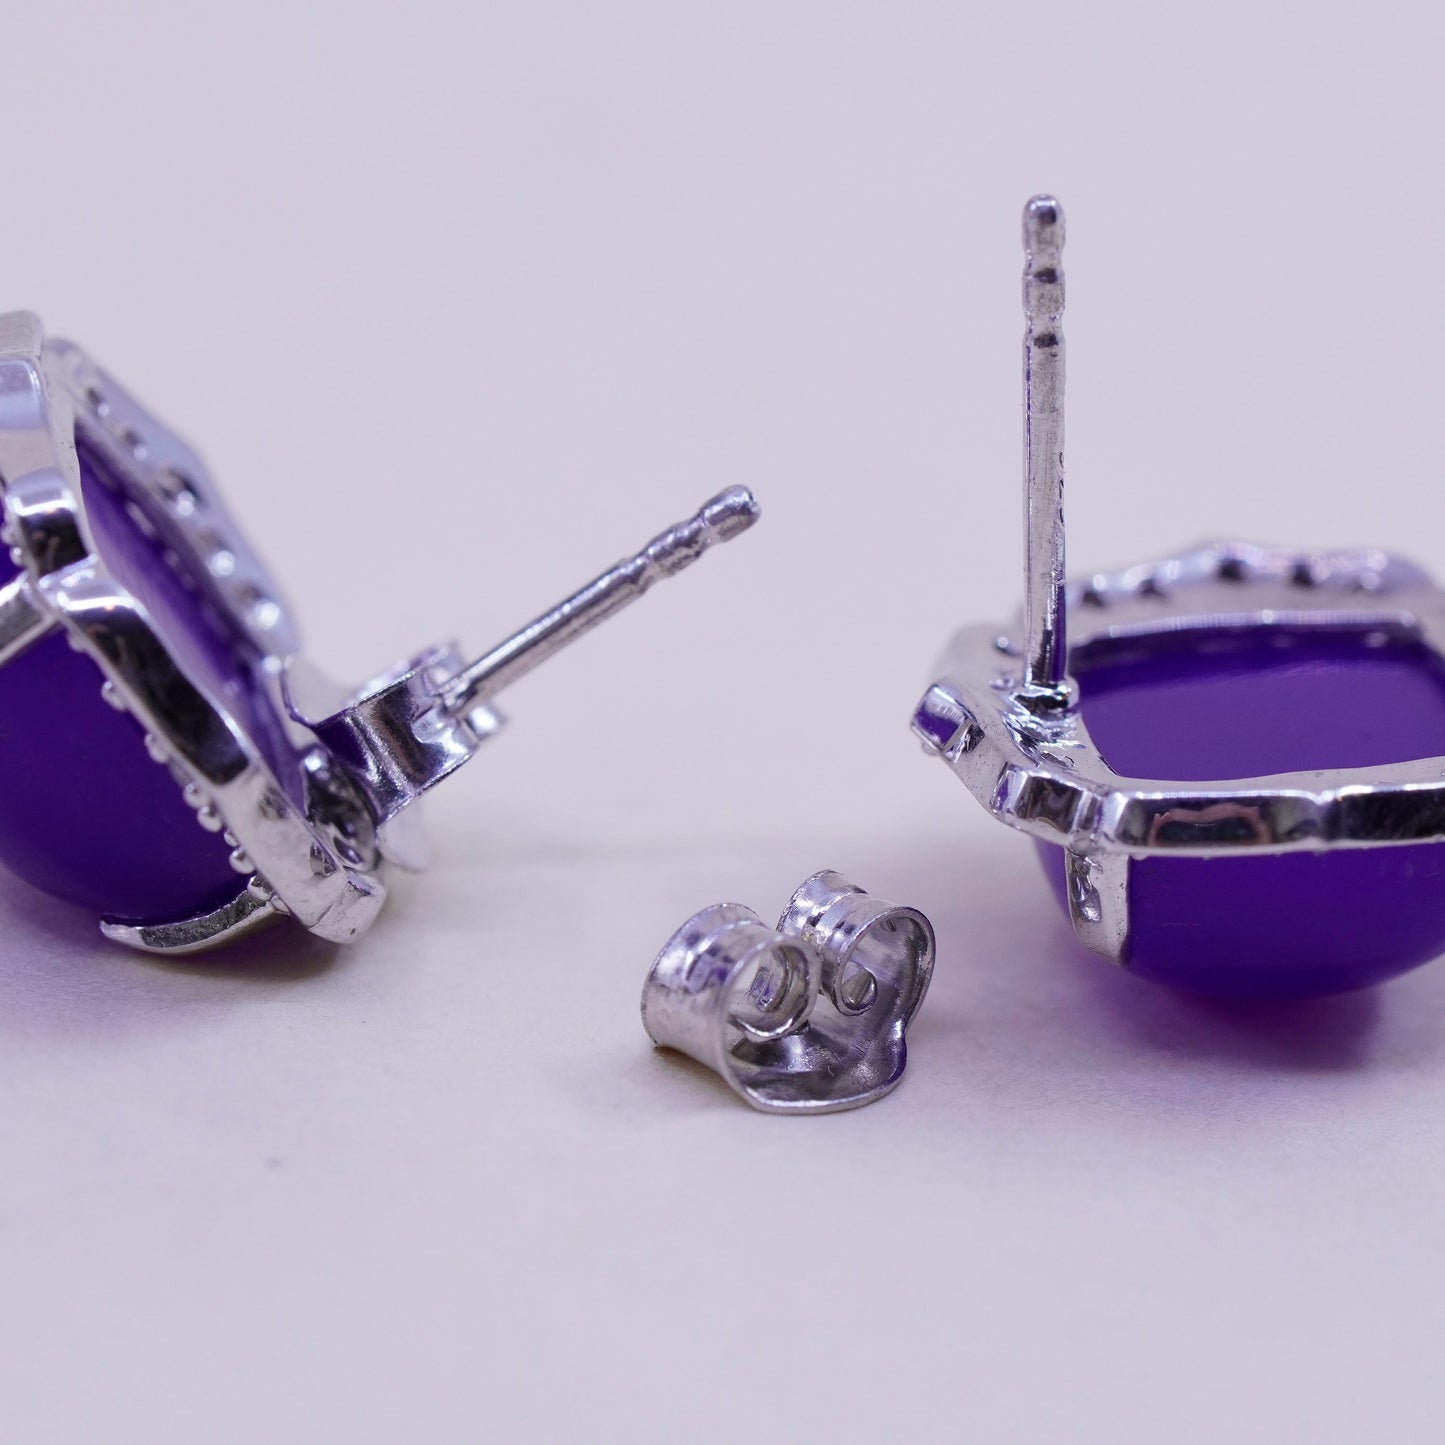 Vintage sterling silver handmade earrings, 925 studs with amethyst and diamond